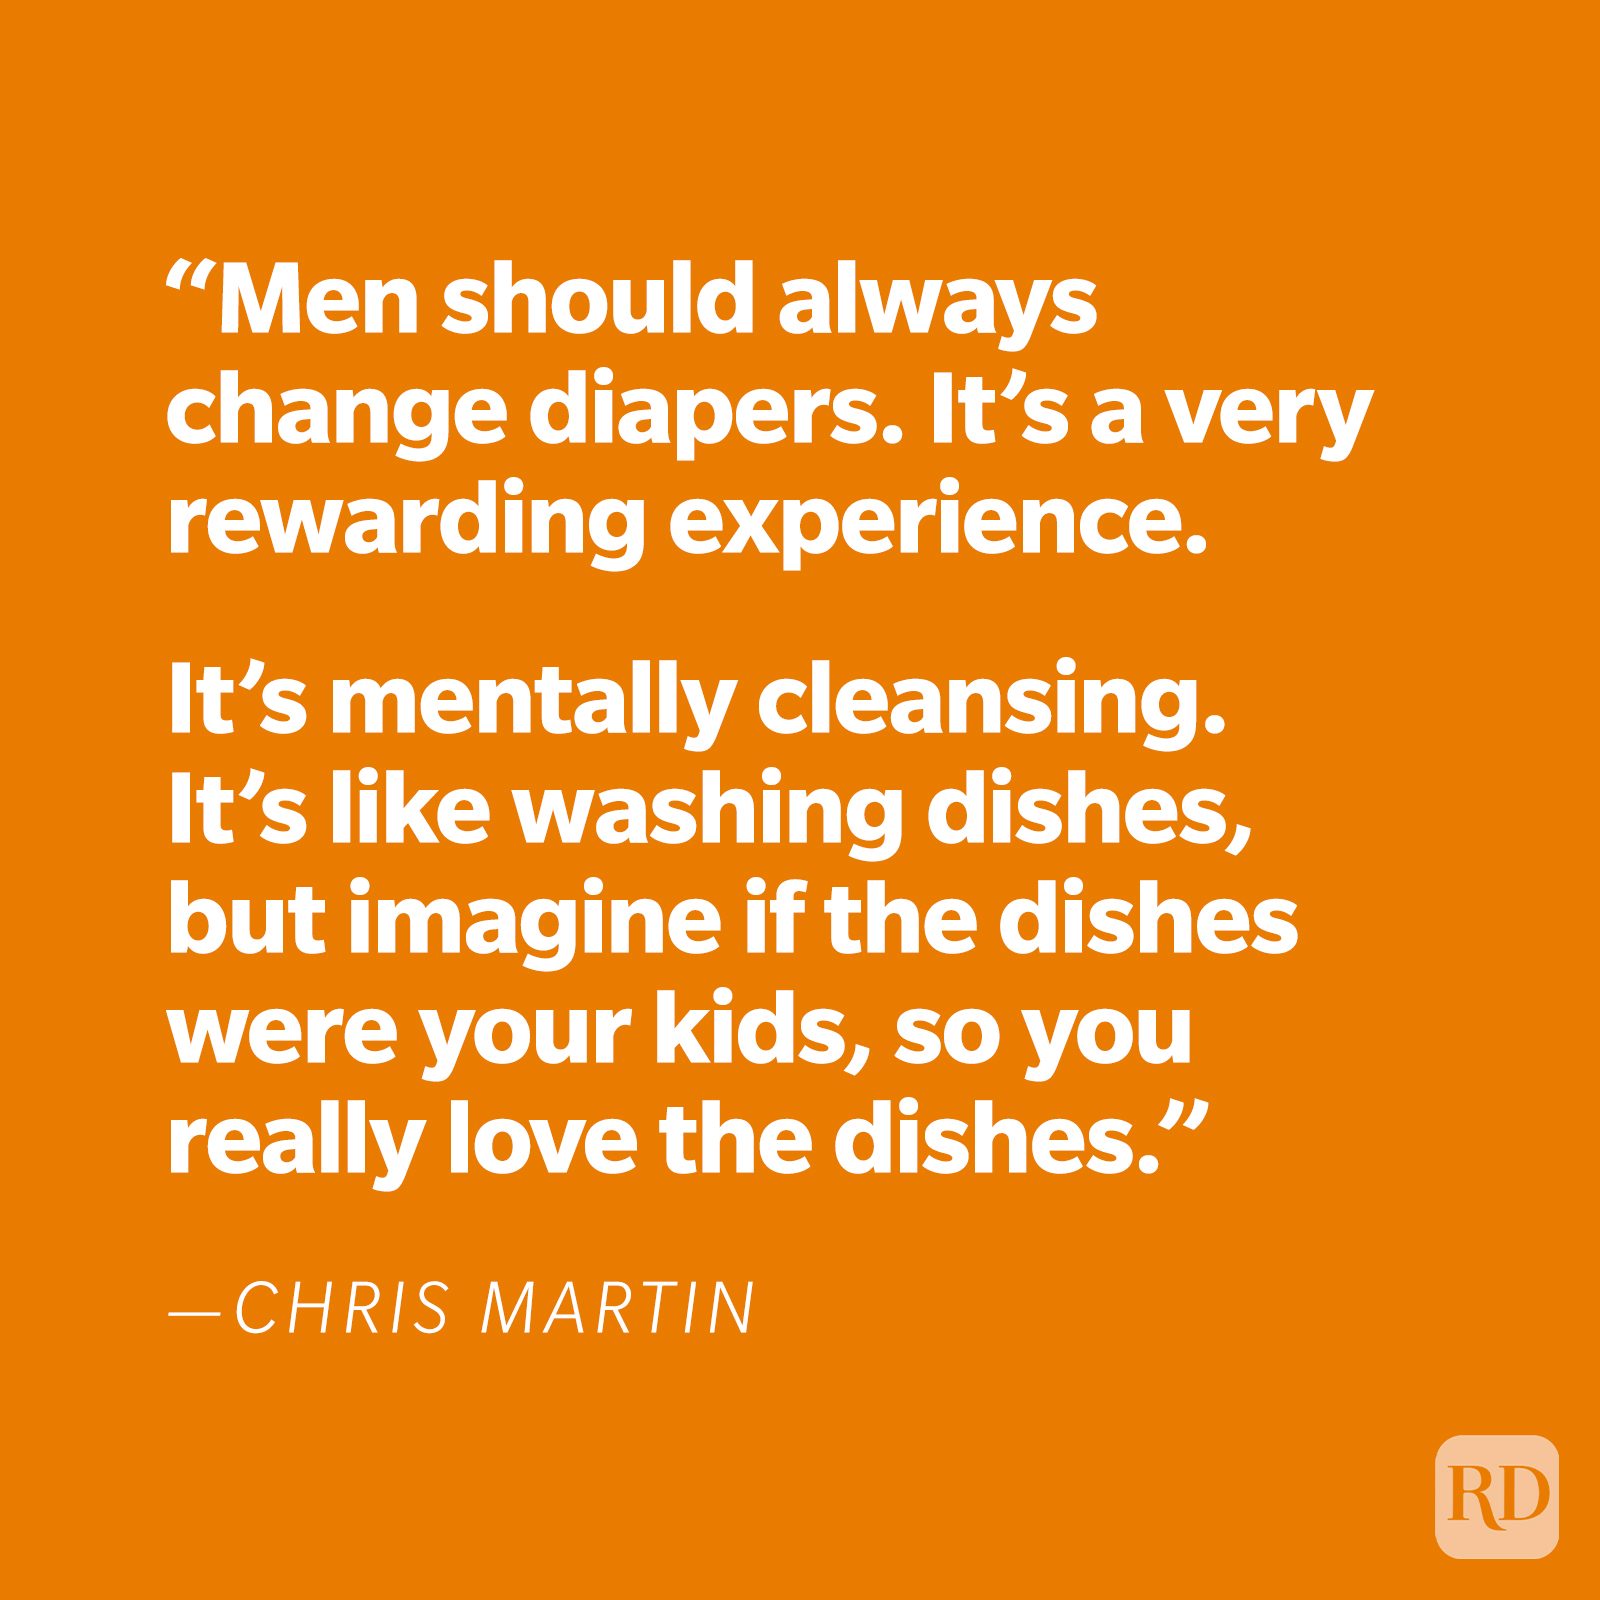 “Men should always change diapers. It’s a very rewarding experience. It’s mentally cleansing. It’s like washing dishes, but imagine if the dishes were your kids, so you really love the dishes.” —Chris Martin